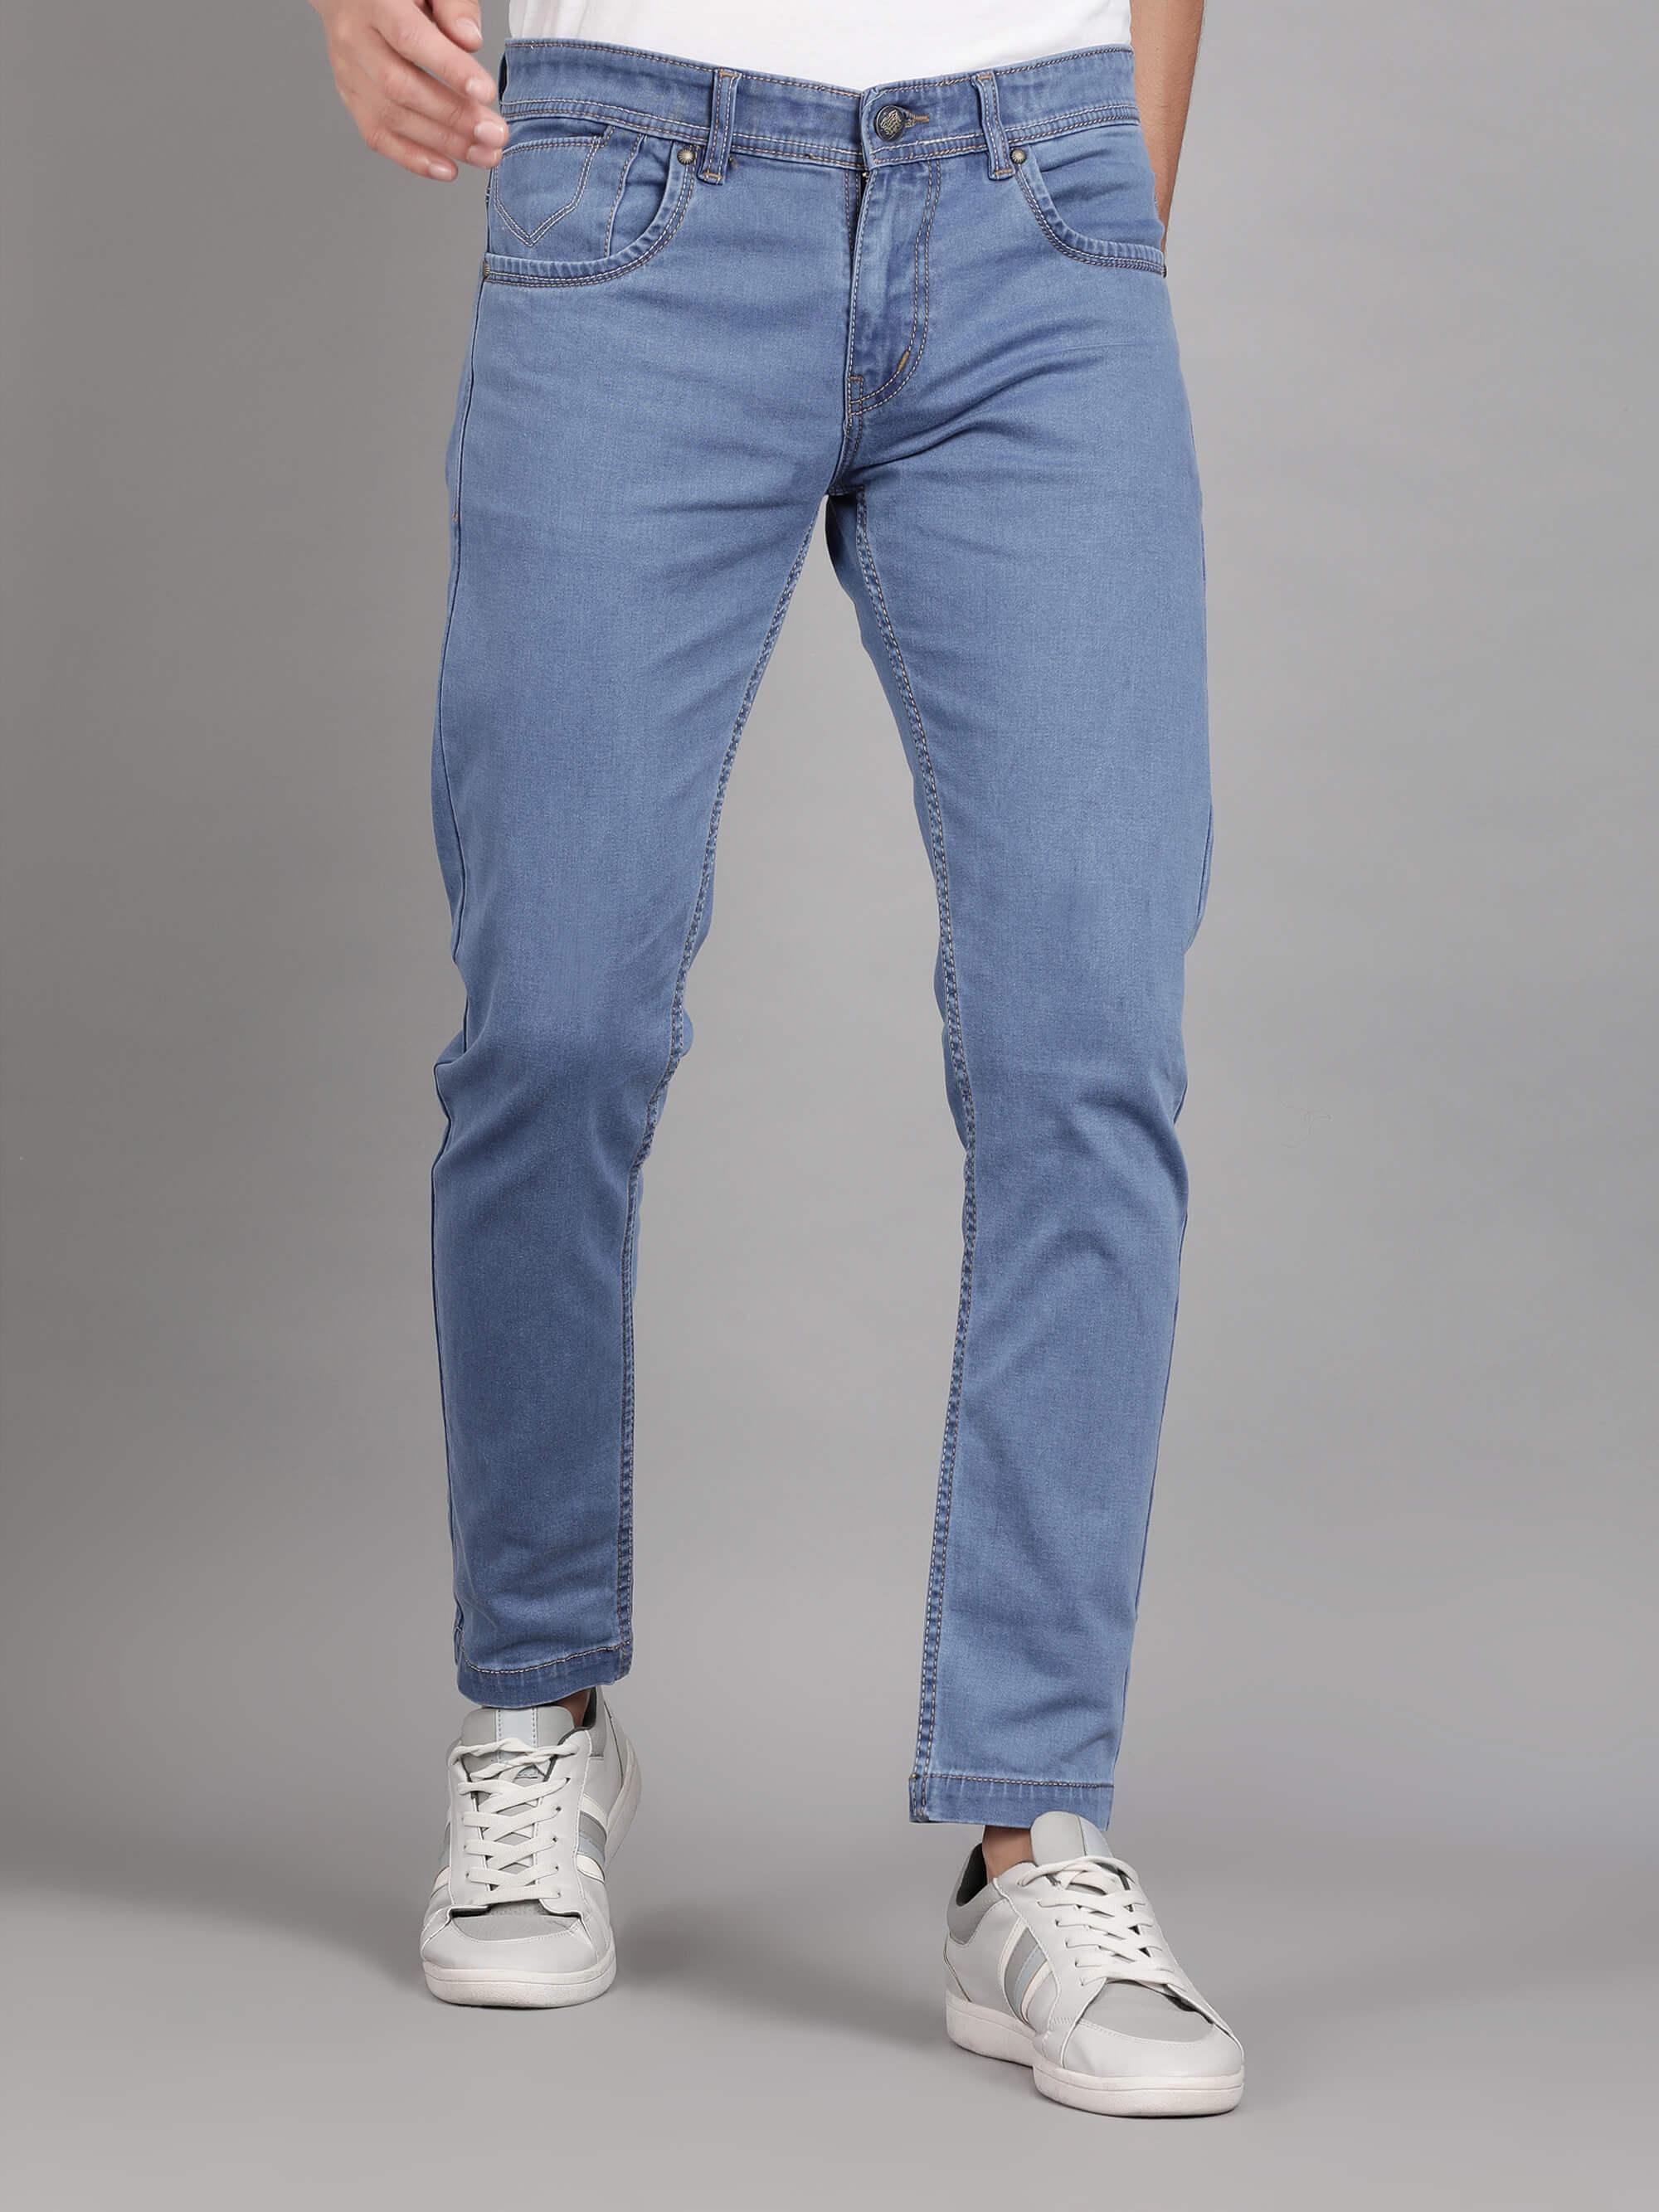 LEVIS 511 1432 FADED LIGHT BLUE 29X30 SLIM STRETCH JEANS MENS PREOWNED |  eBay